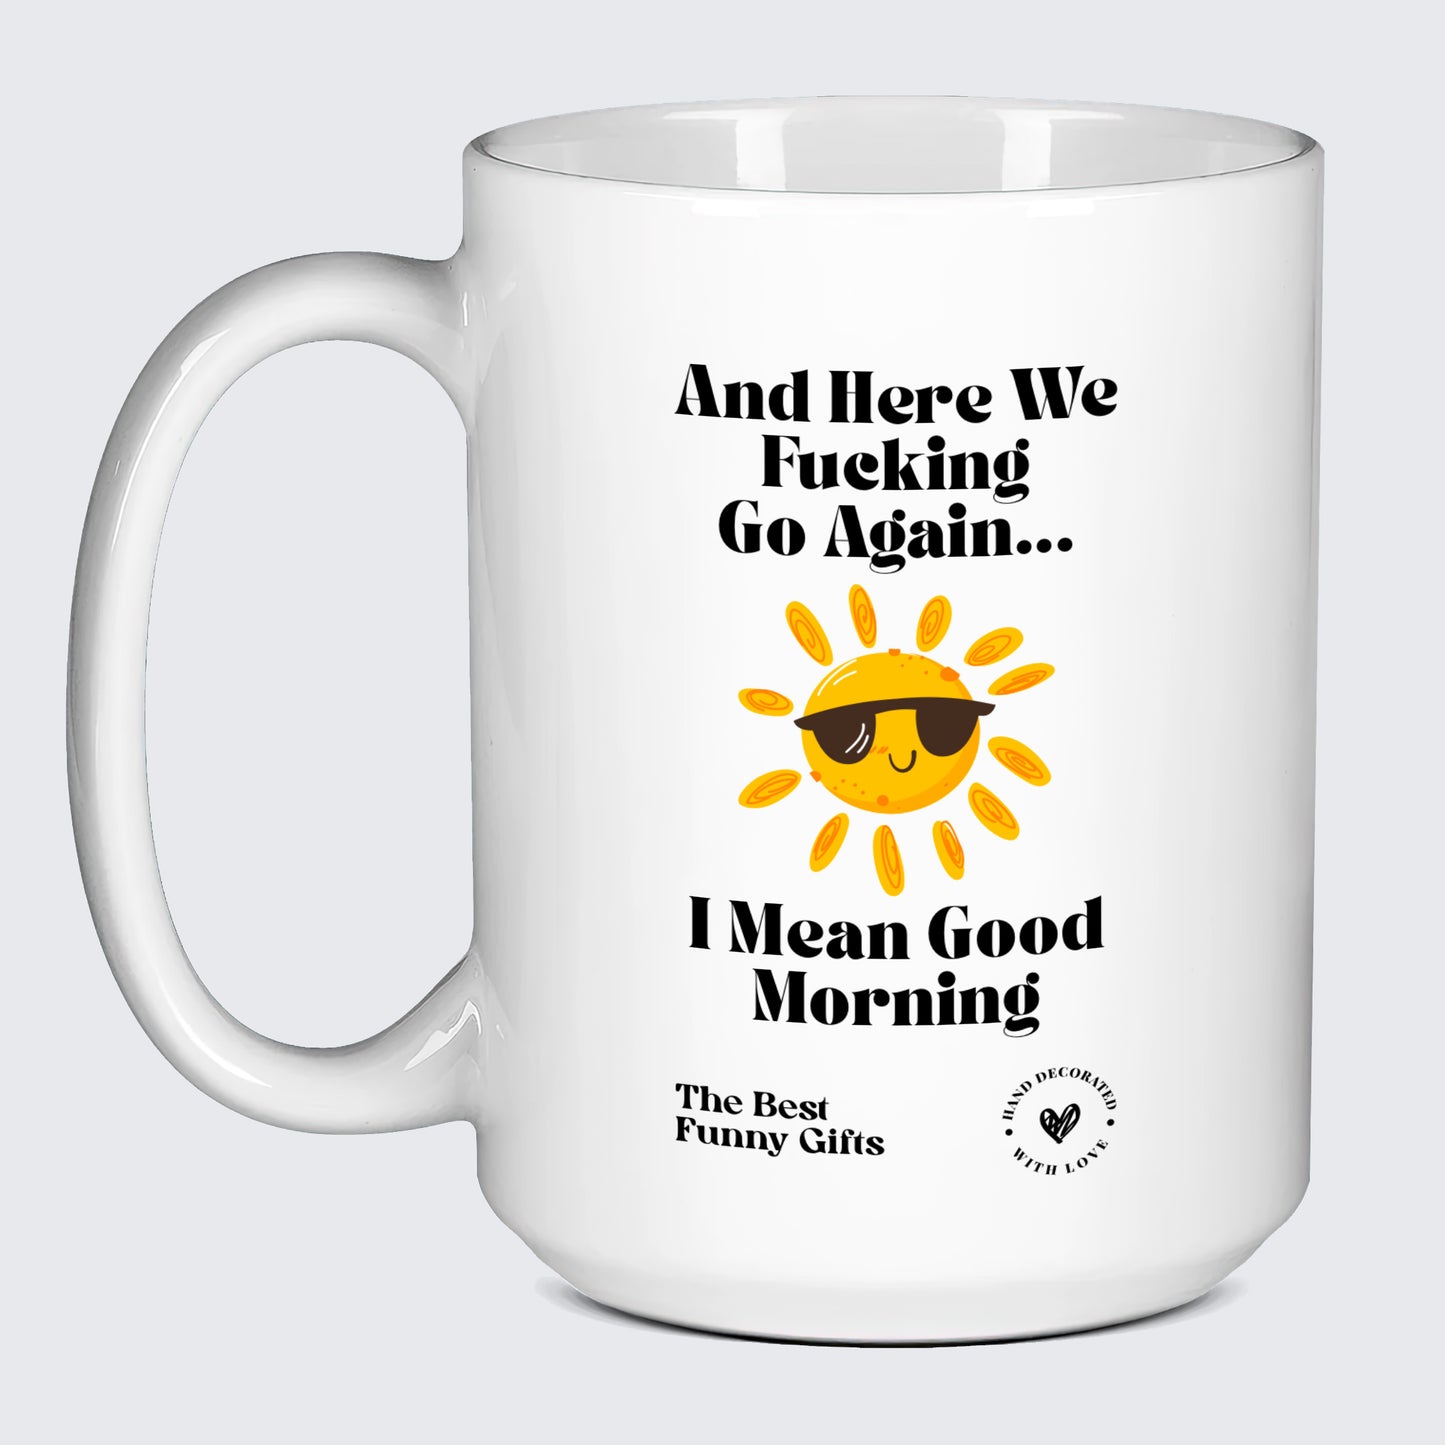 Unique Coffee Mugs And Here We Fucking Go Again... I Mean Good Morning - The Best Funny Gifts